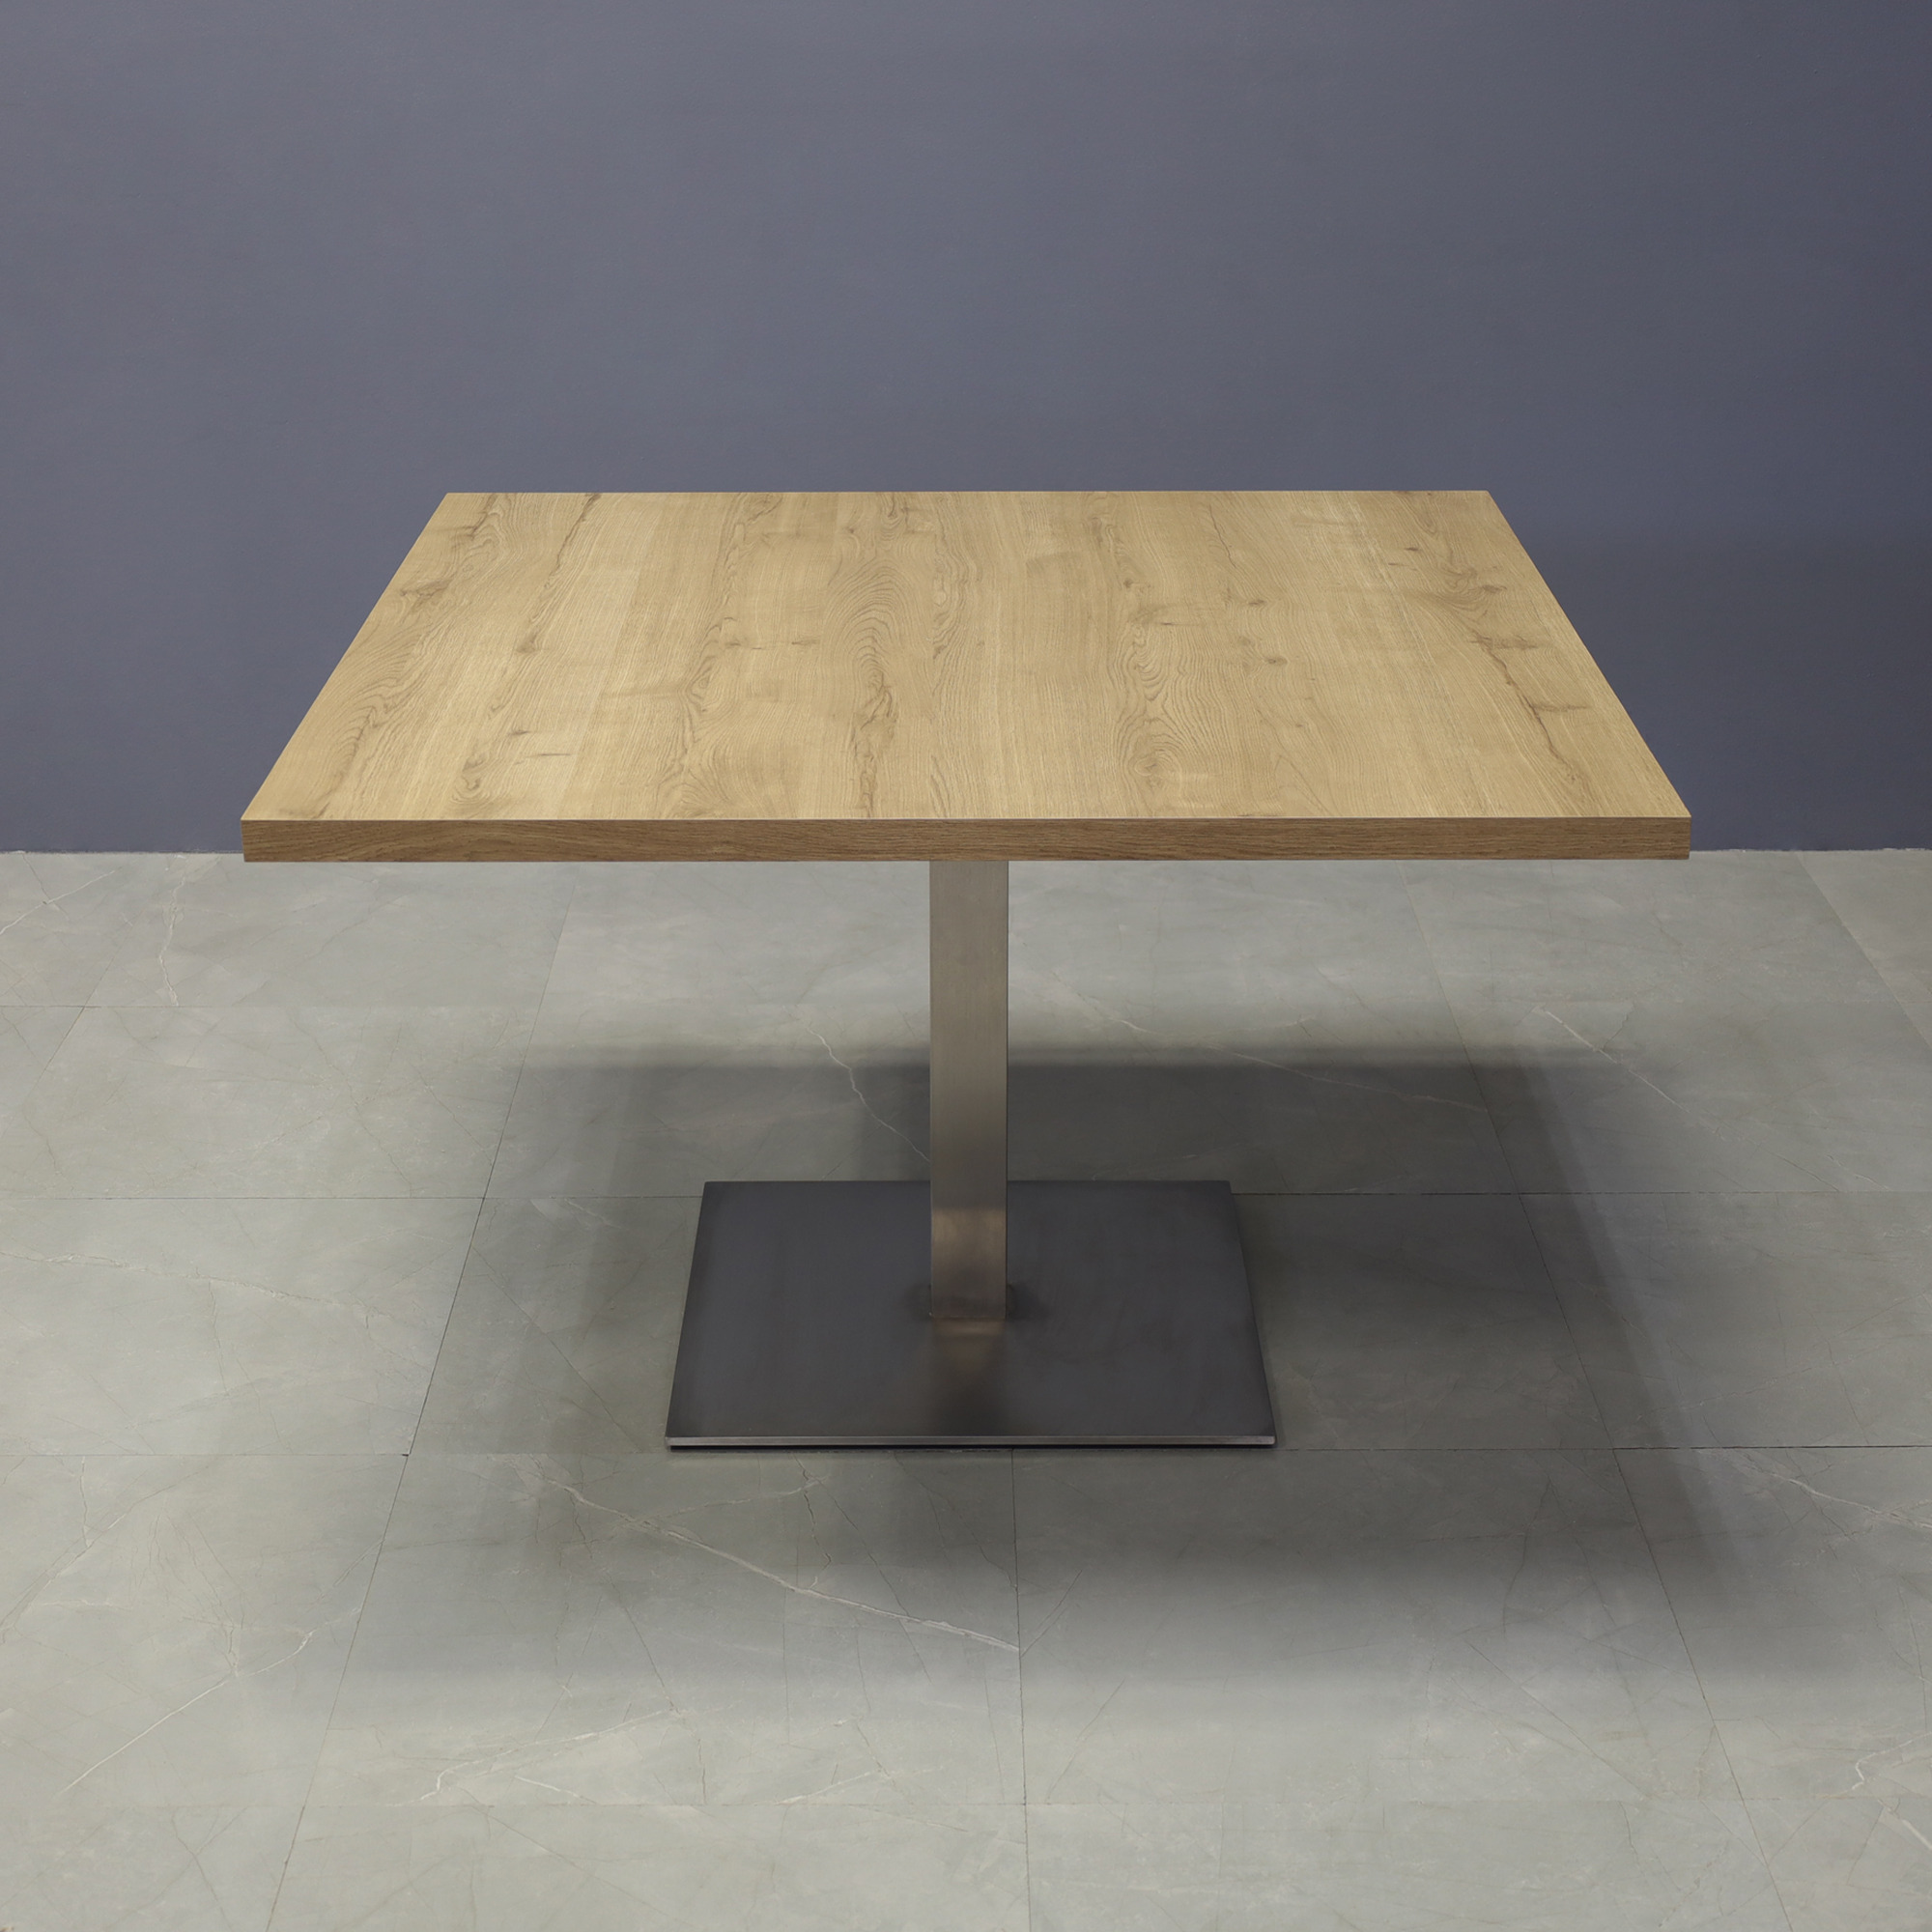 48-inch California Square Conference Table with Laminate Top in uptown walnut matte and aluminum stainless steel base, shown here.